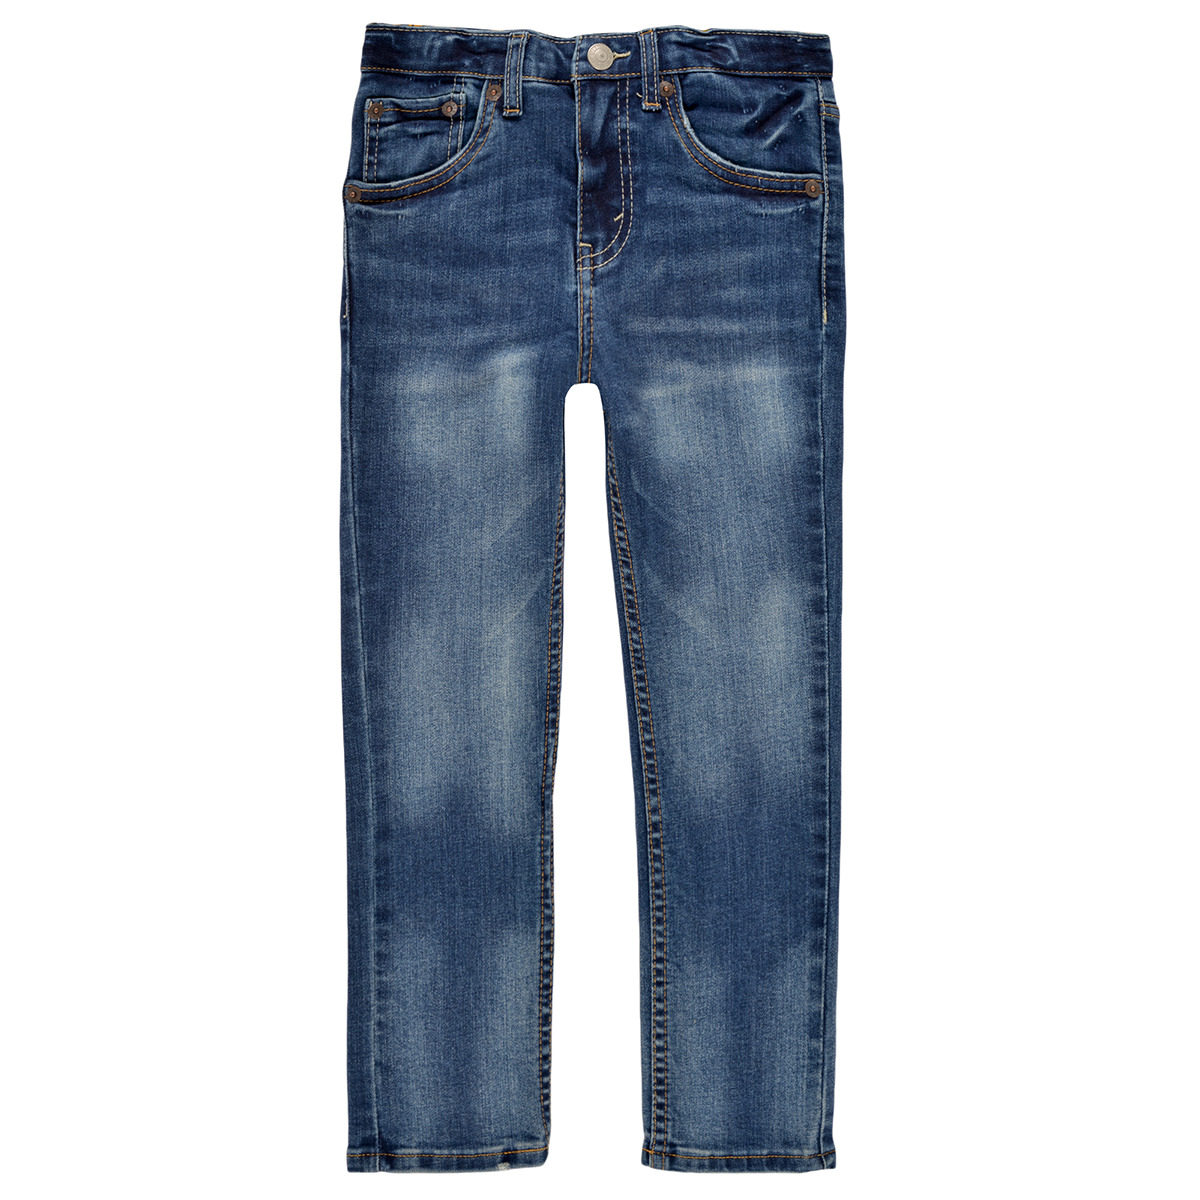 Skinny jeans Levis 510 SKINNY FIT EVERYDAY PERFORMANCE JEANS